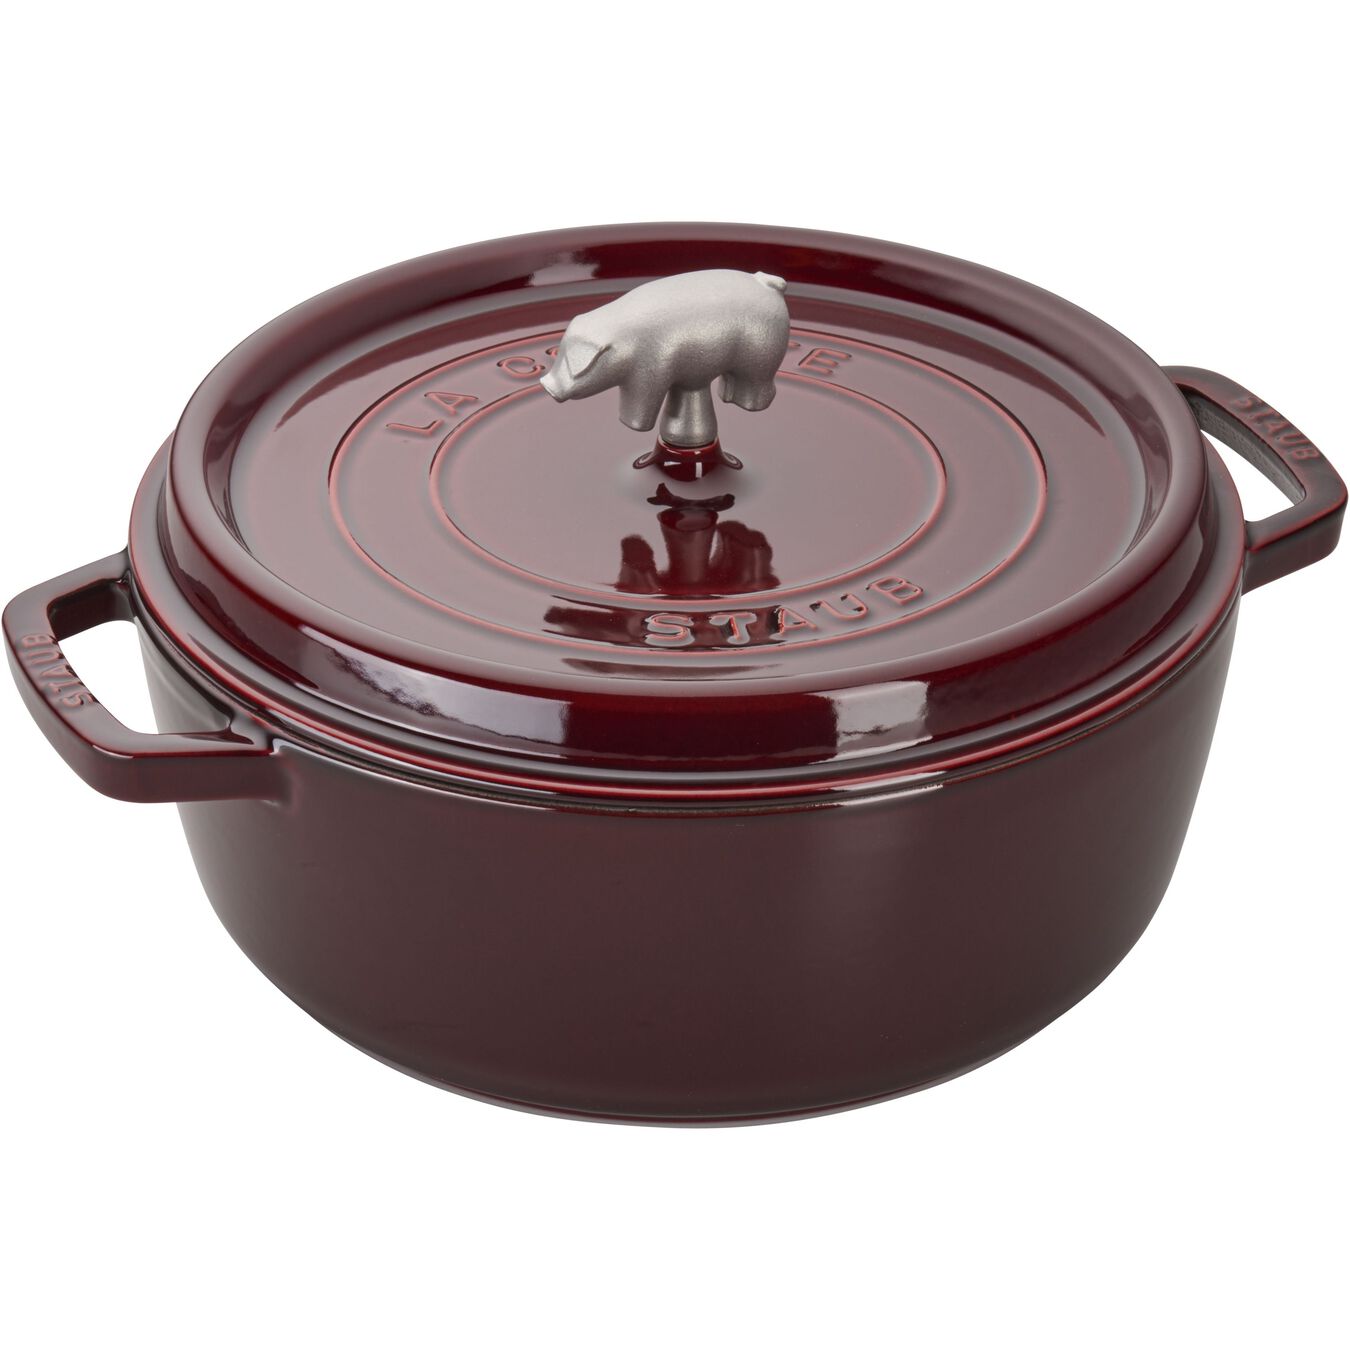 5.7 l cast iron pig Cocotte, grenadine-red - Visual Imperfections,,large 5